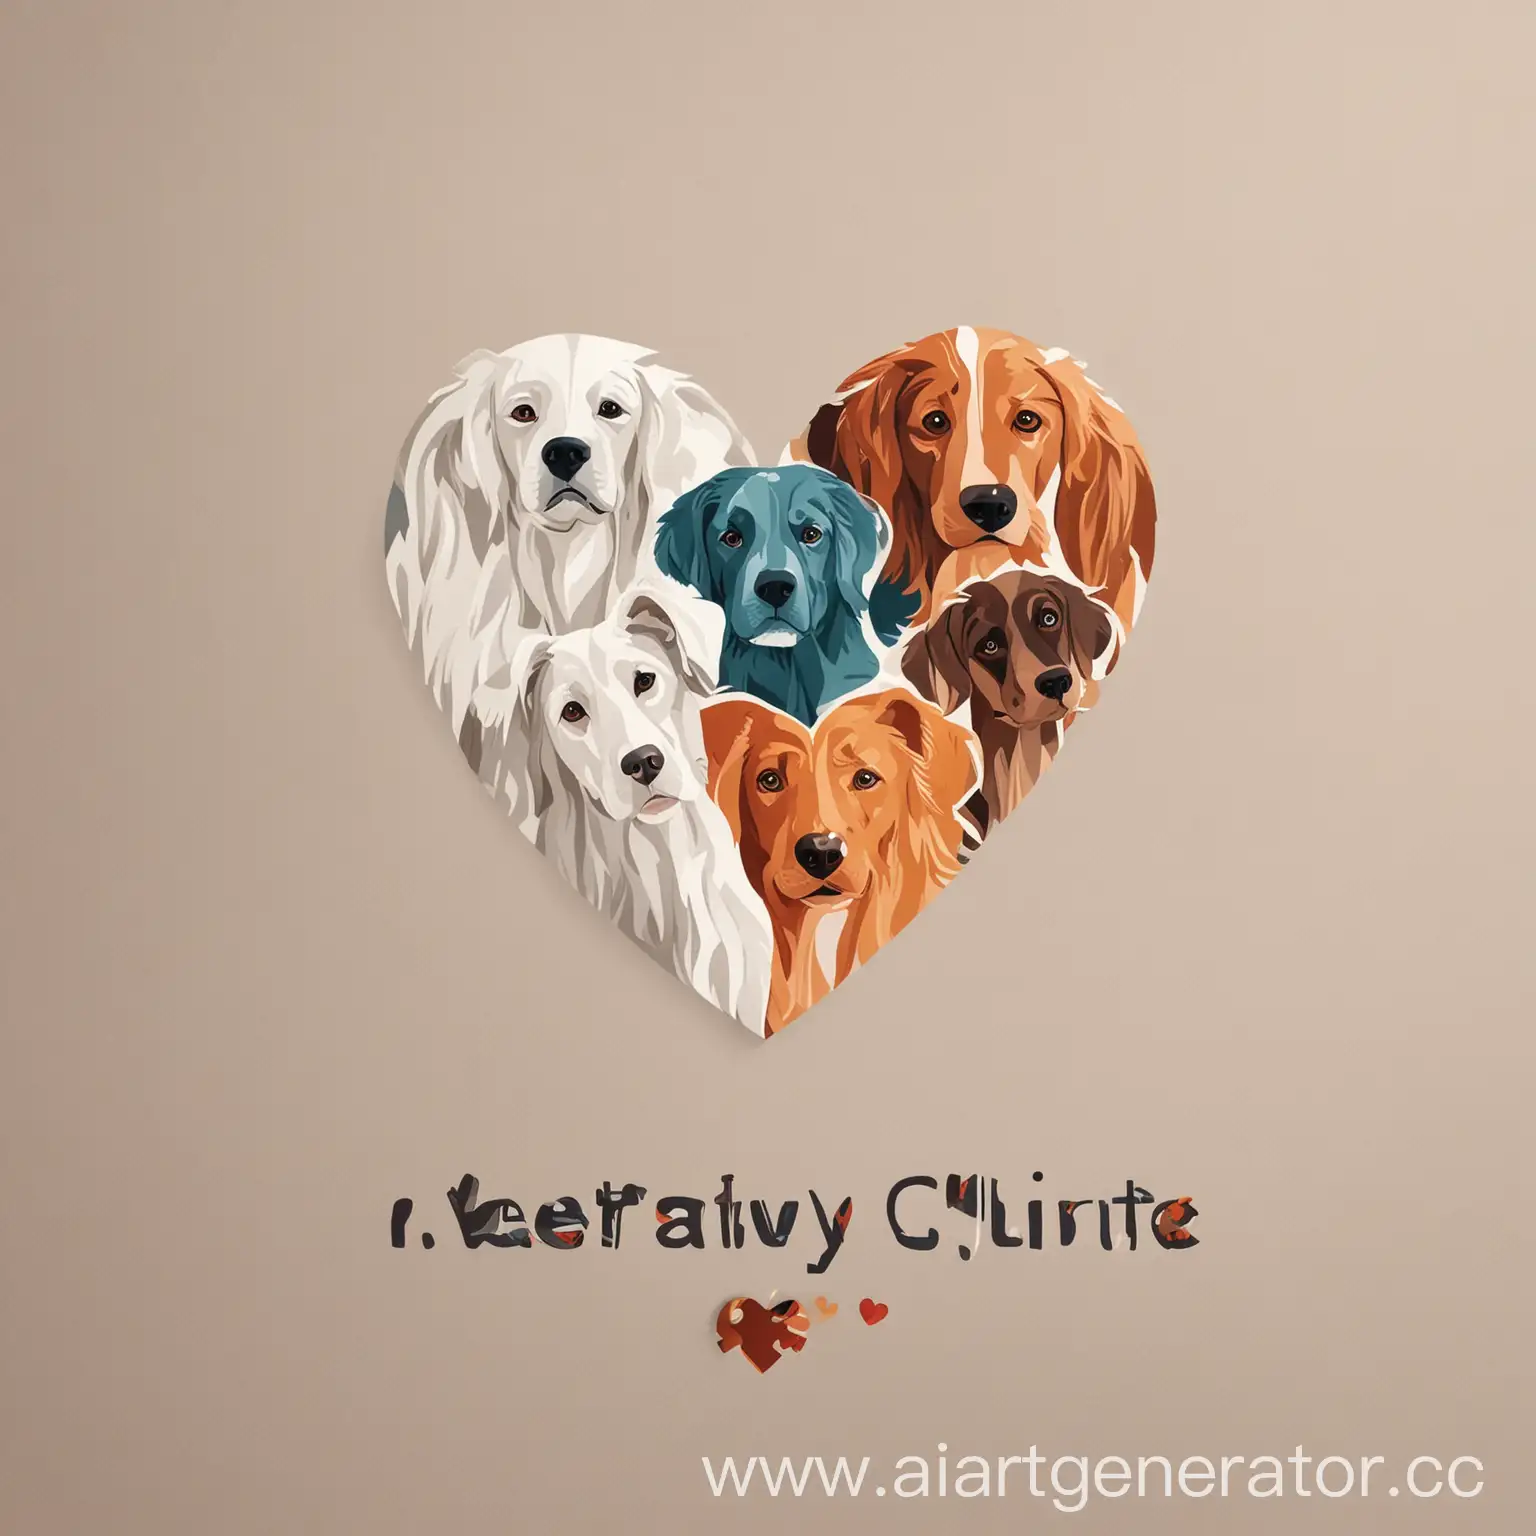 Minimalistic-Veterinary-Clinic-Logo-Heart-Puzzle-with-Five-Dogs